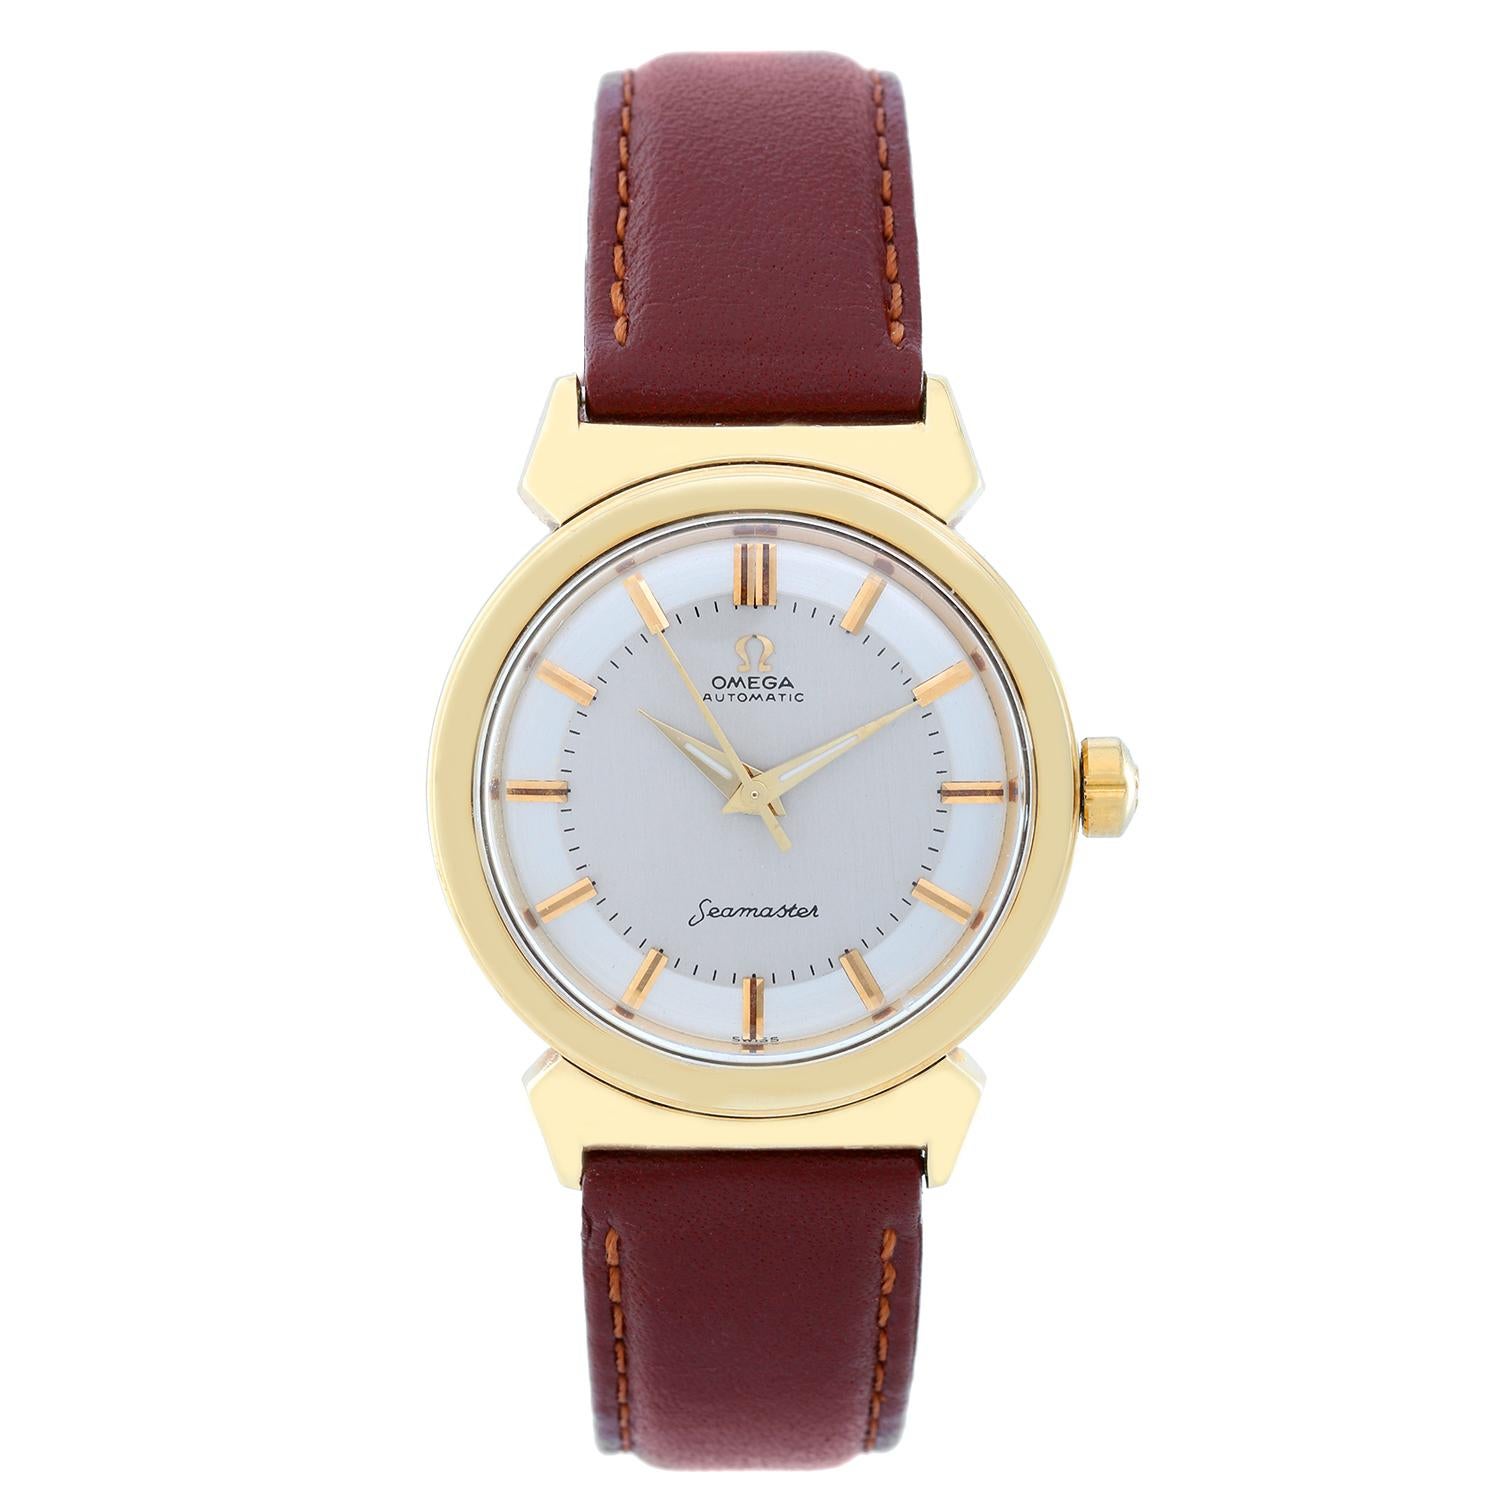 Men's Omega yellow gold-filled Seamaster Automatic Wristwatch